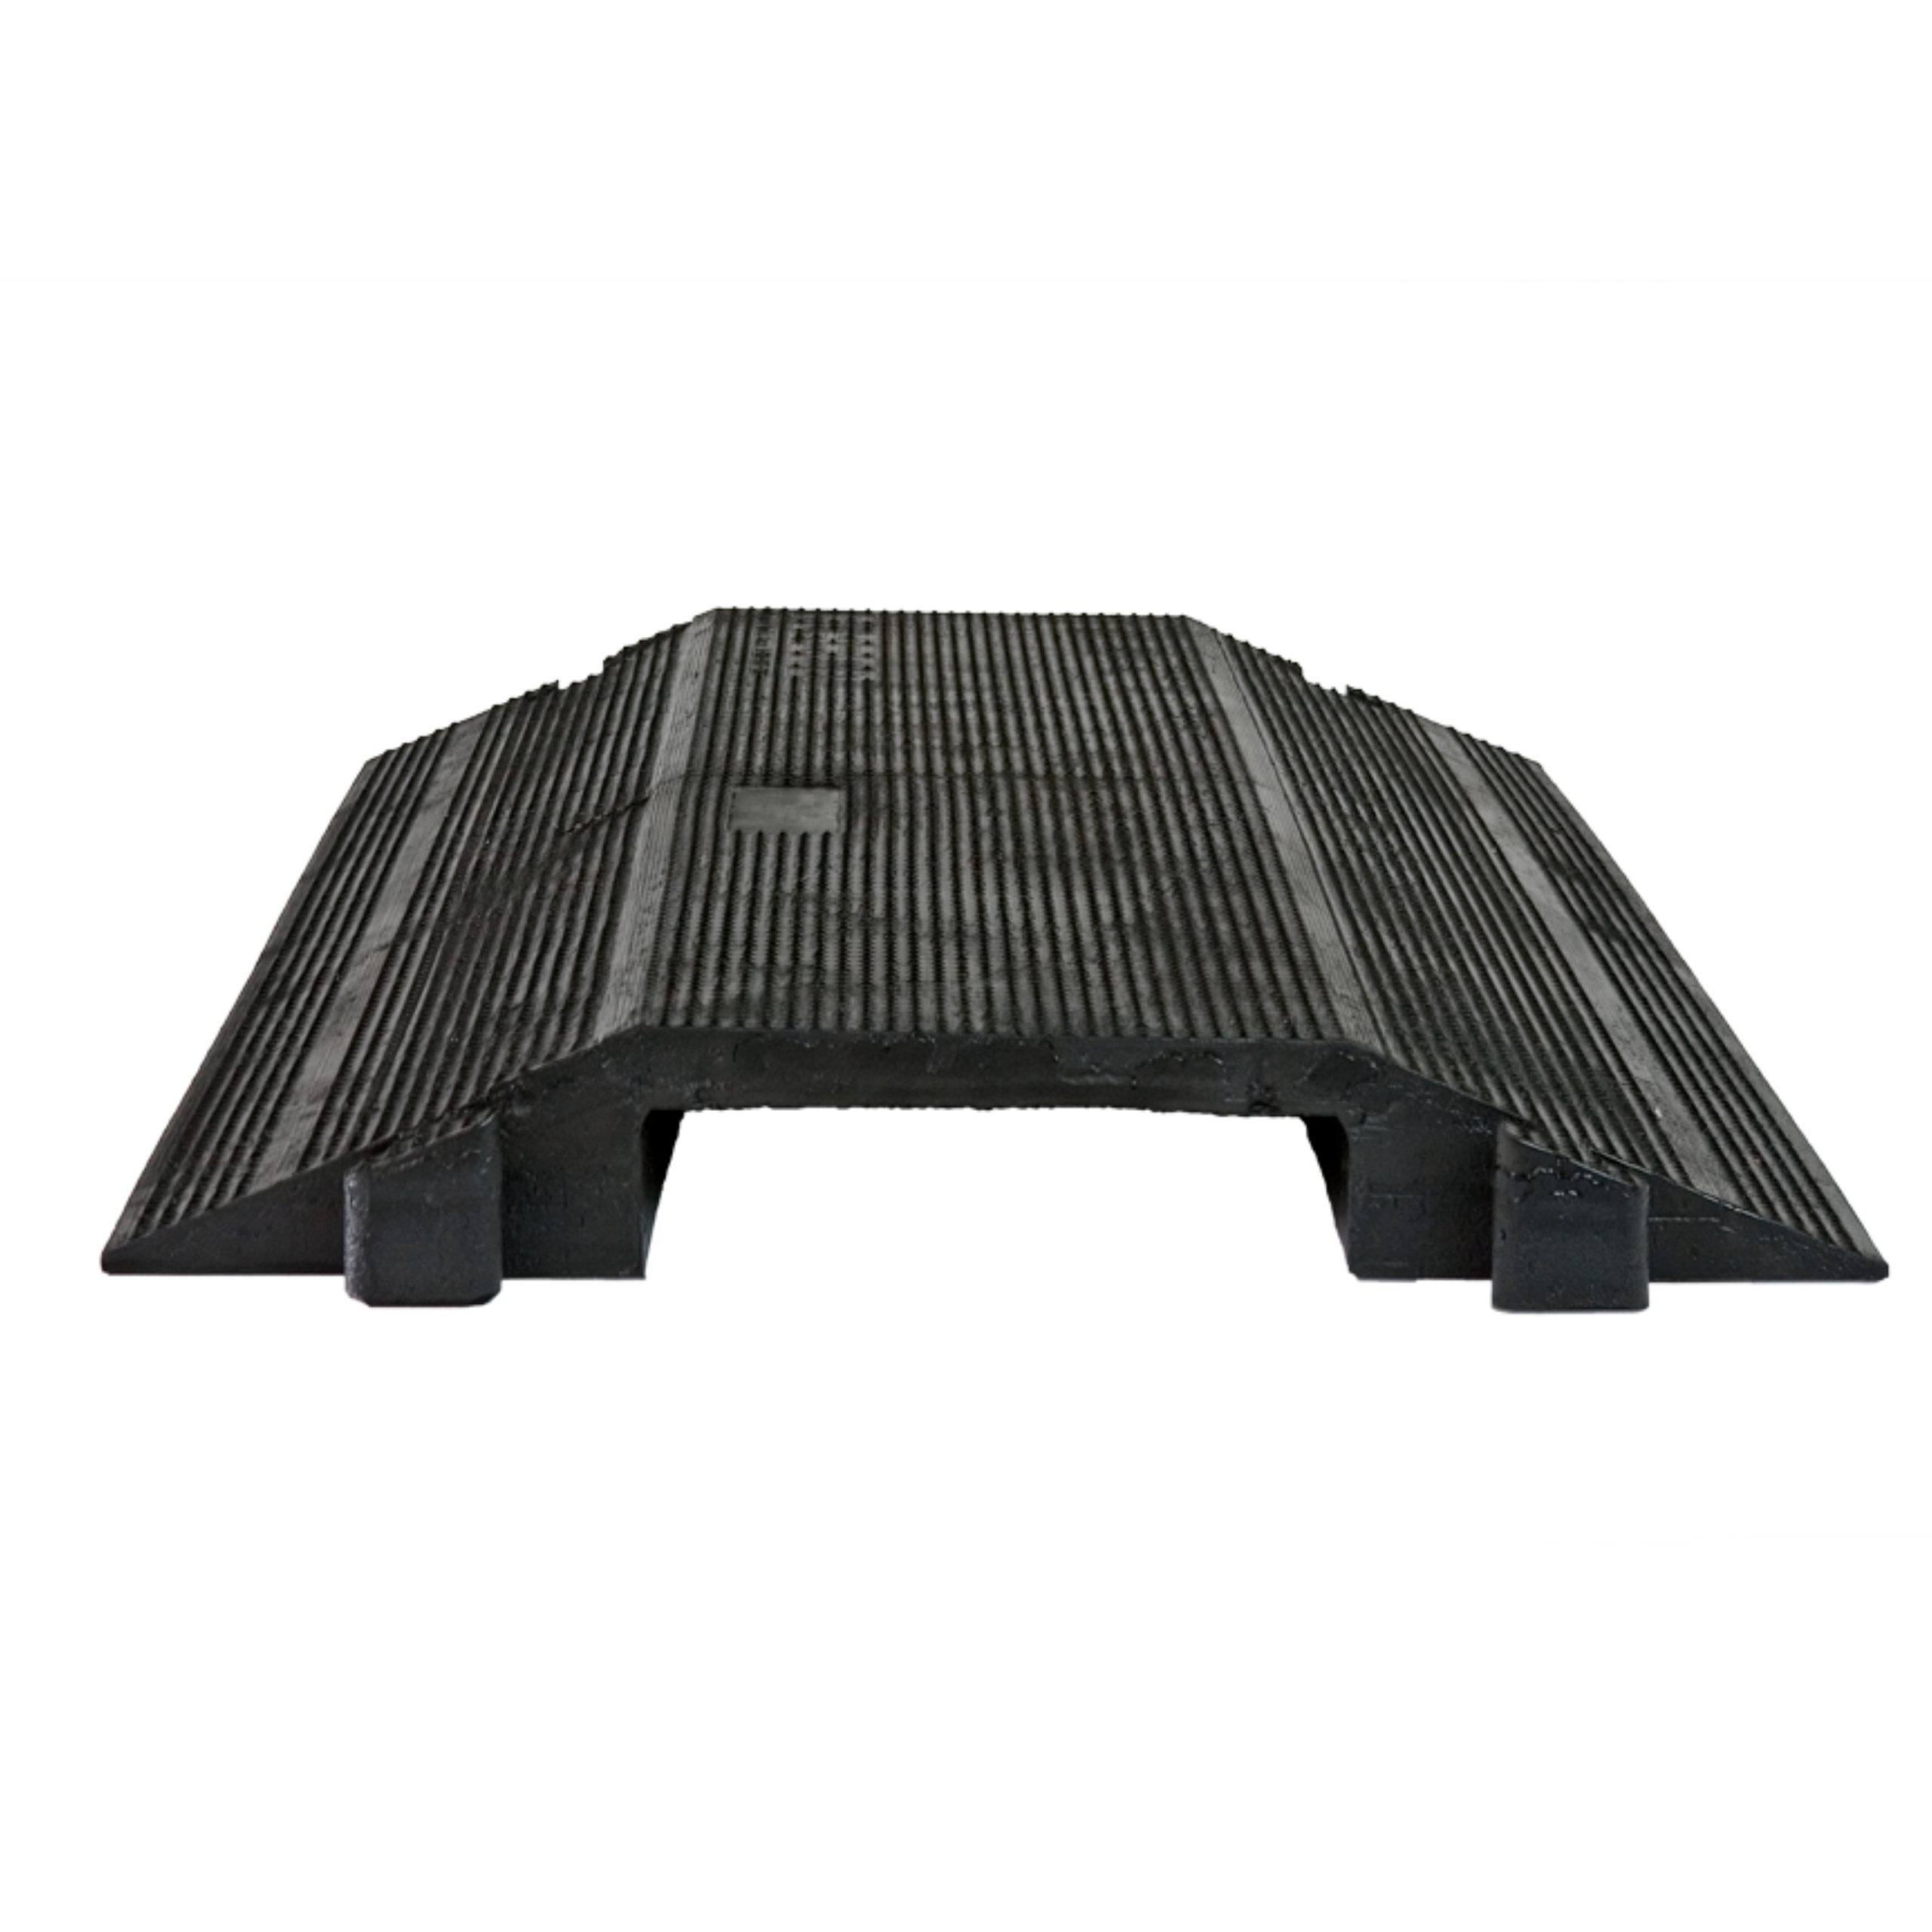 Elasco ED1050-BK Dropover, Single 1.5 inch Channel, Black, 12 pack. In  Stock. Ships Today. - Cable Protector Works - Elasco Wheel Chocks, Cable  Protectors and Cable Ramps %